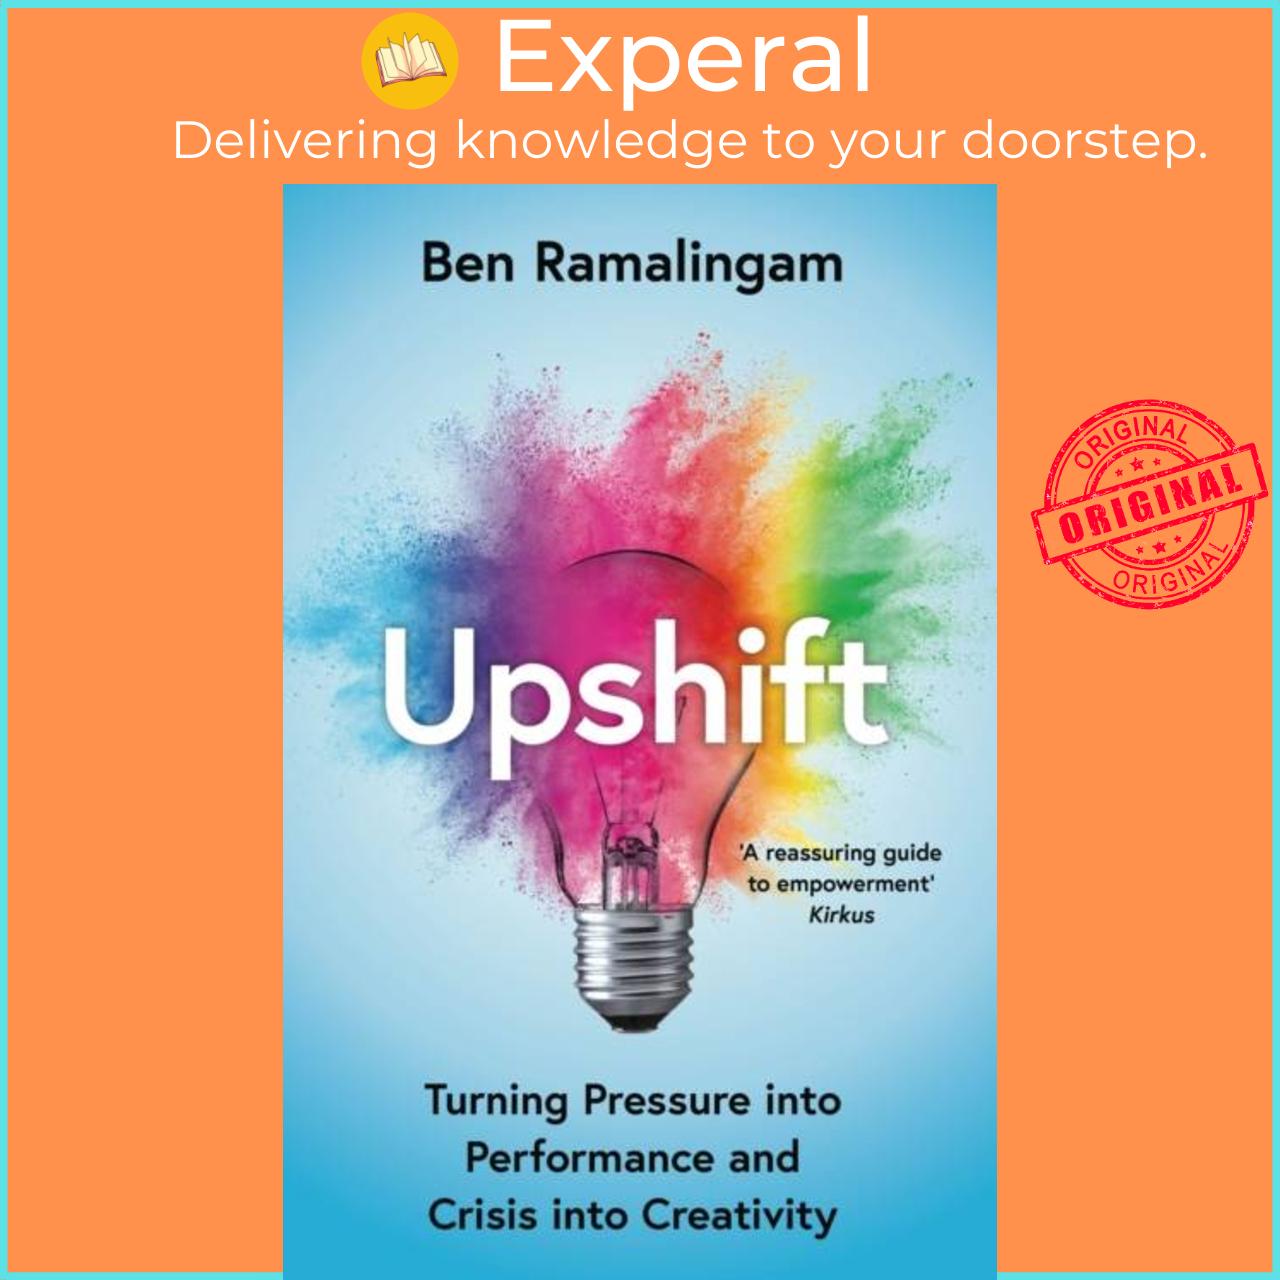 Sách - Upshift - Turning Pressure into Performance and Cr into Creativity by Ben Ramalingam (UK edition, paperback)